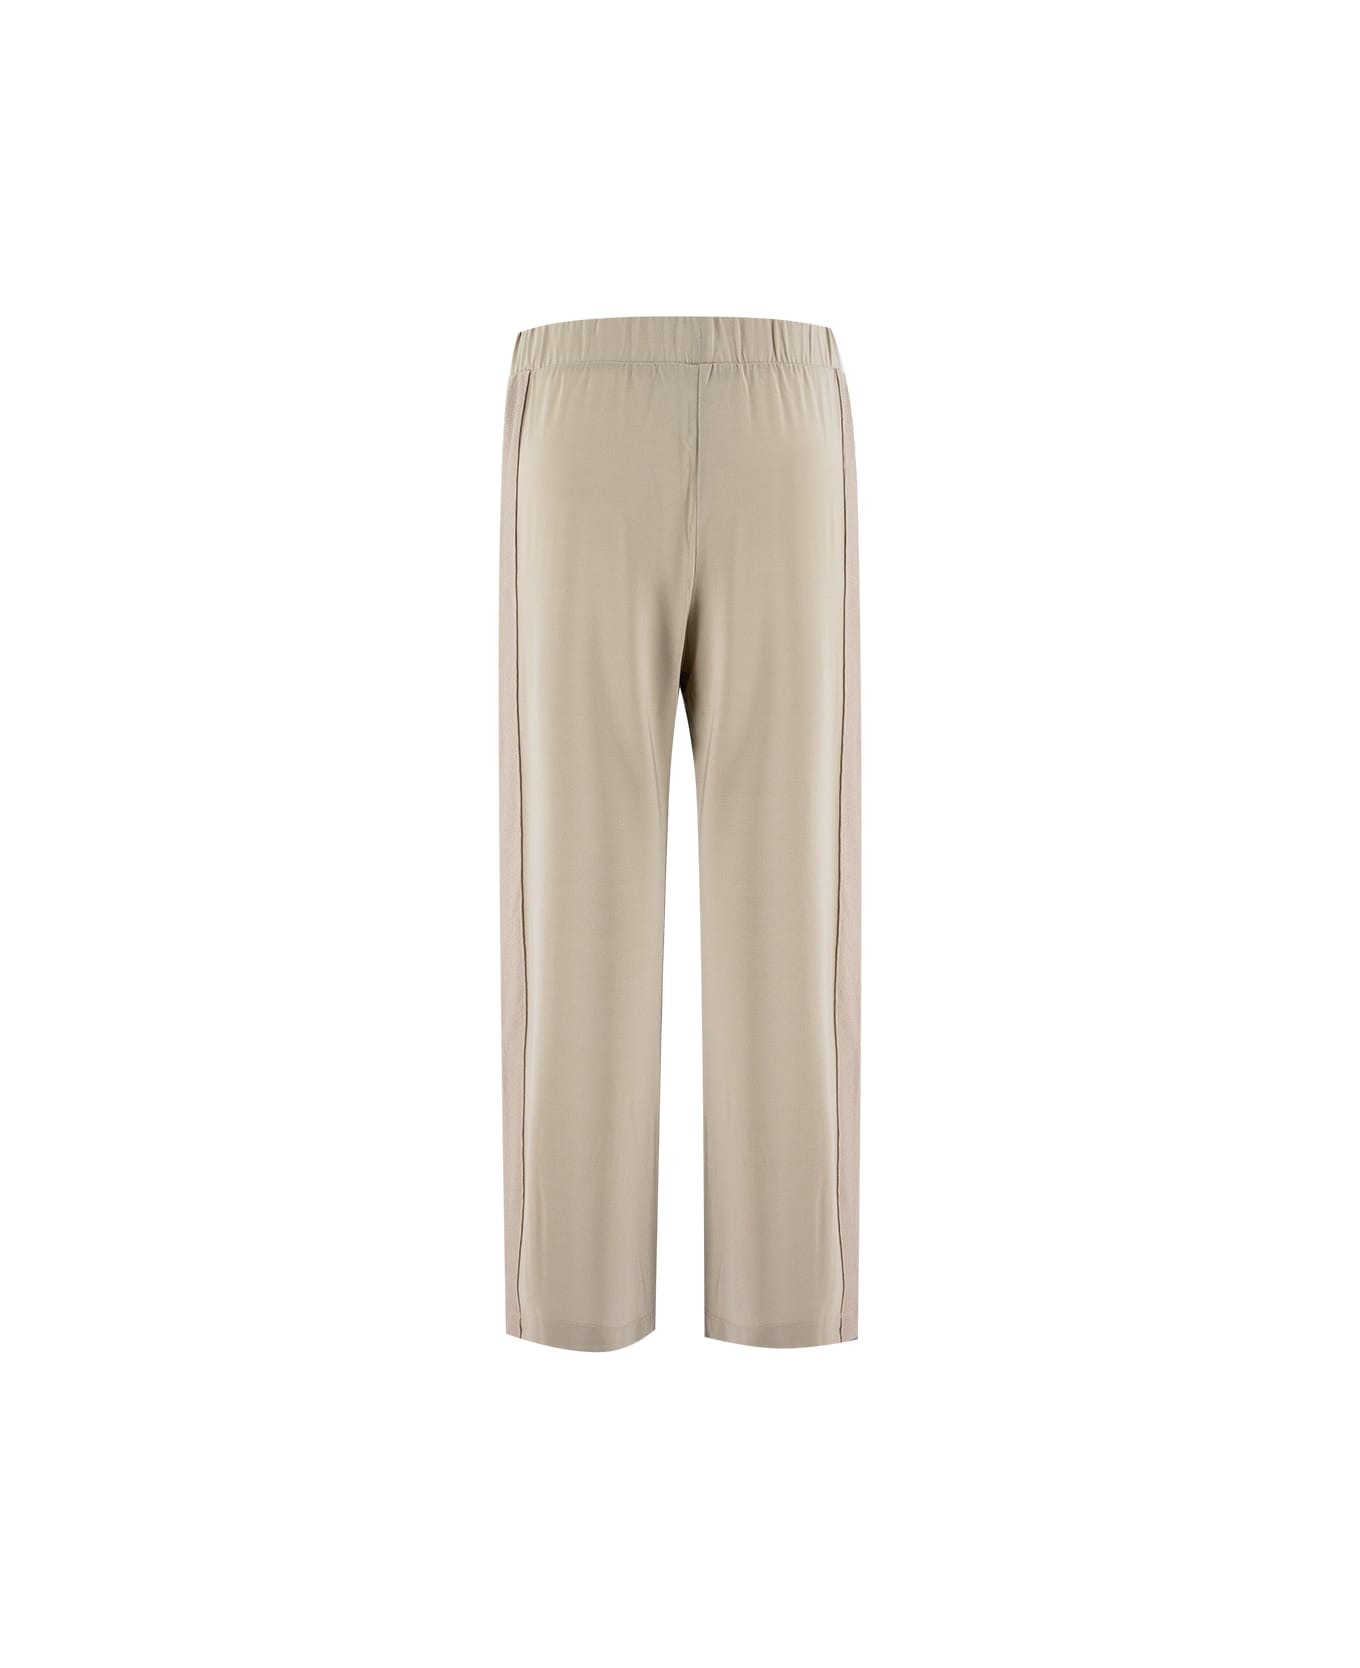 Le Tricot Perugia Trousers - BEIGE ボトムス